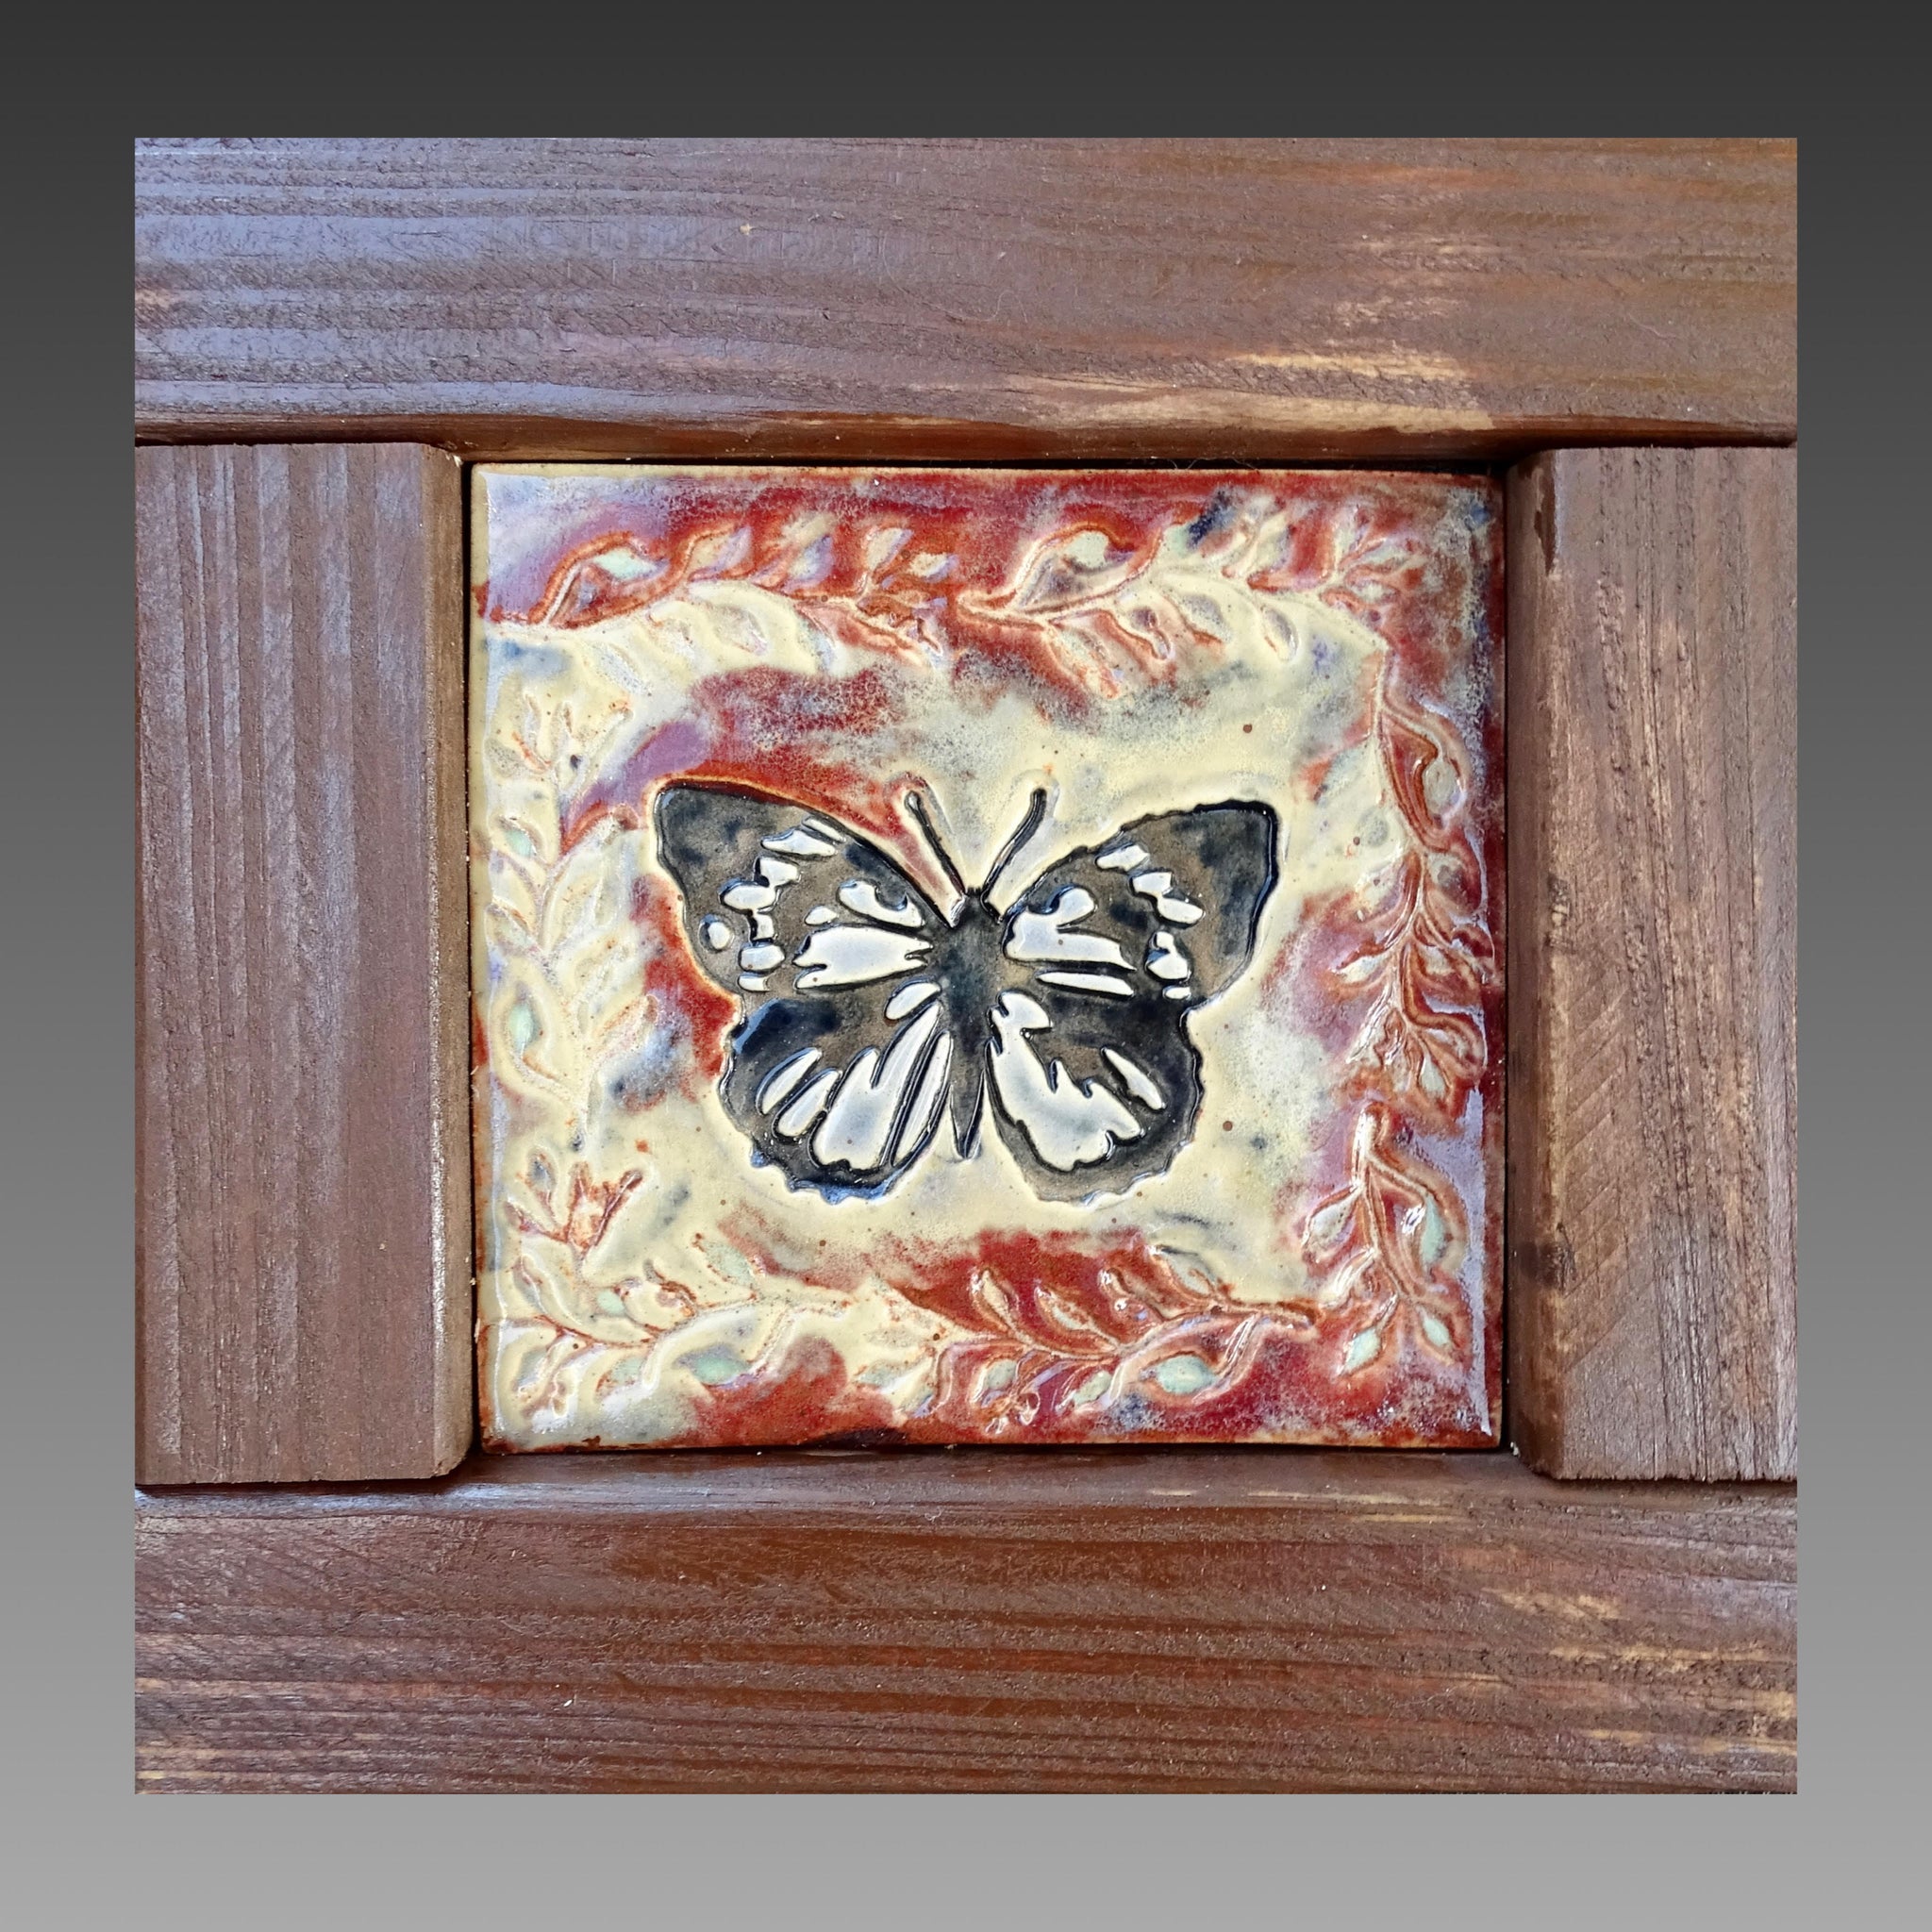 Hnamdade clay art in wooden frame with butterfly and leaves